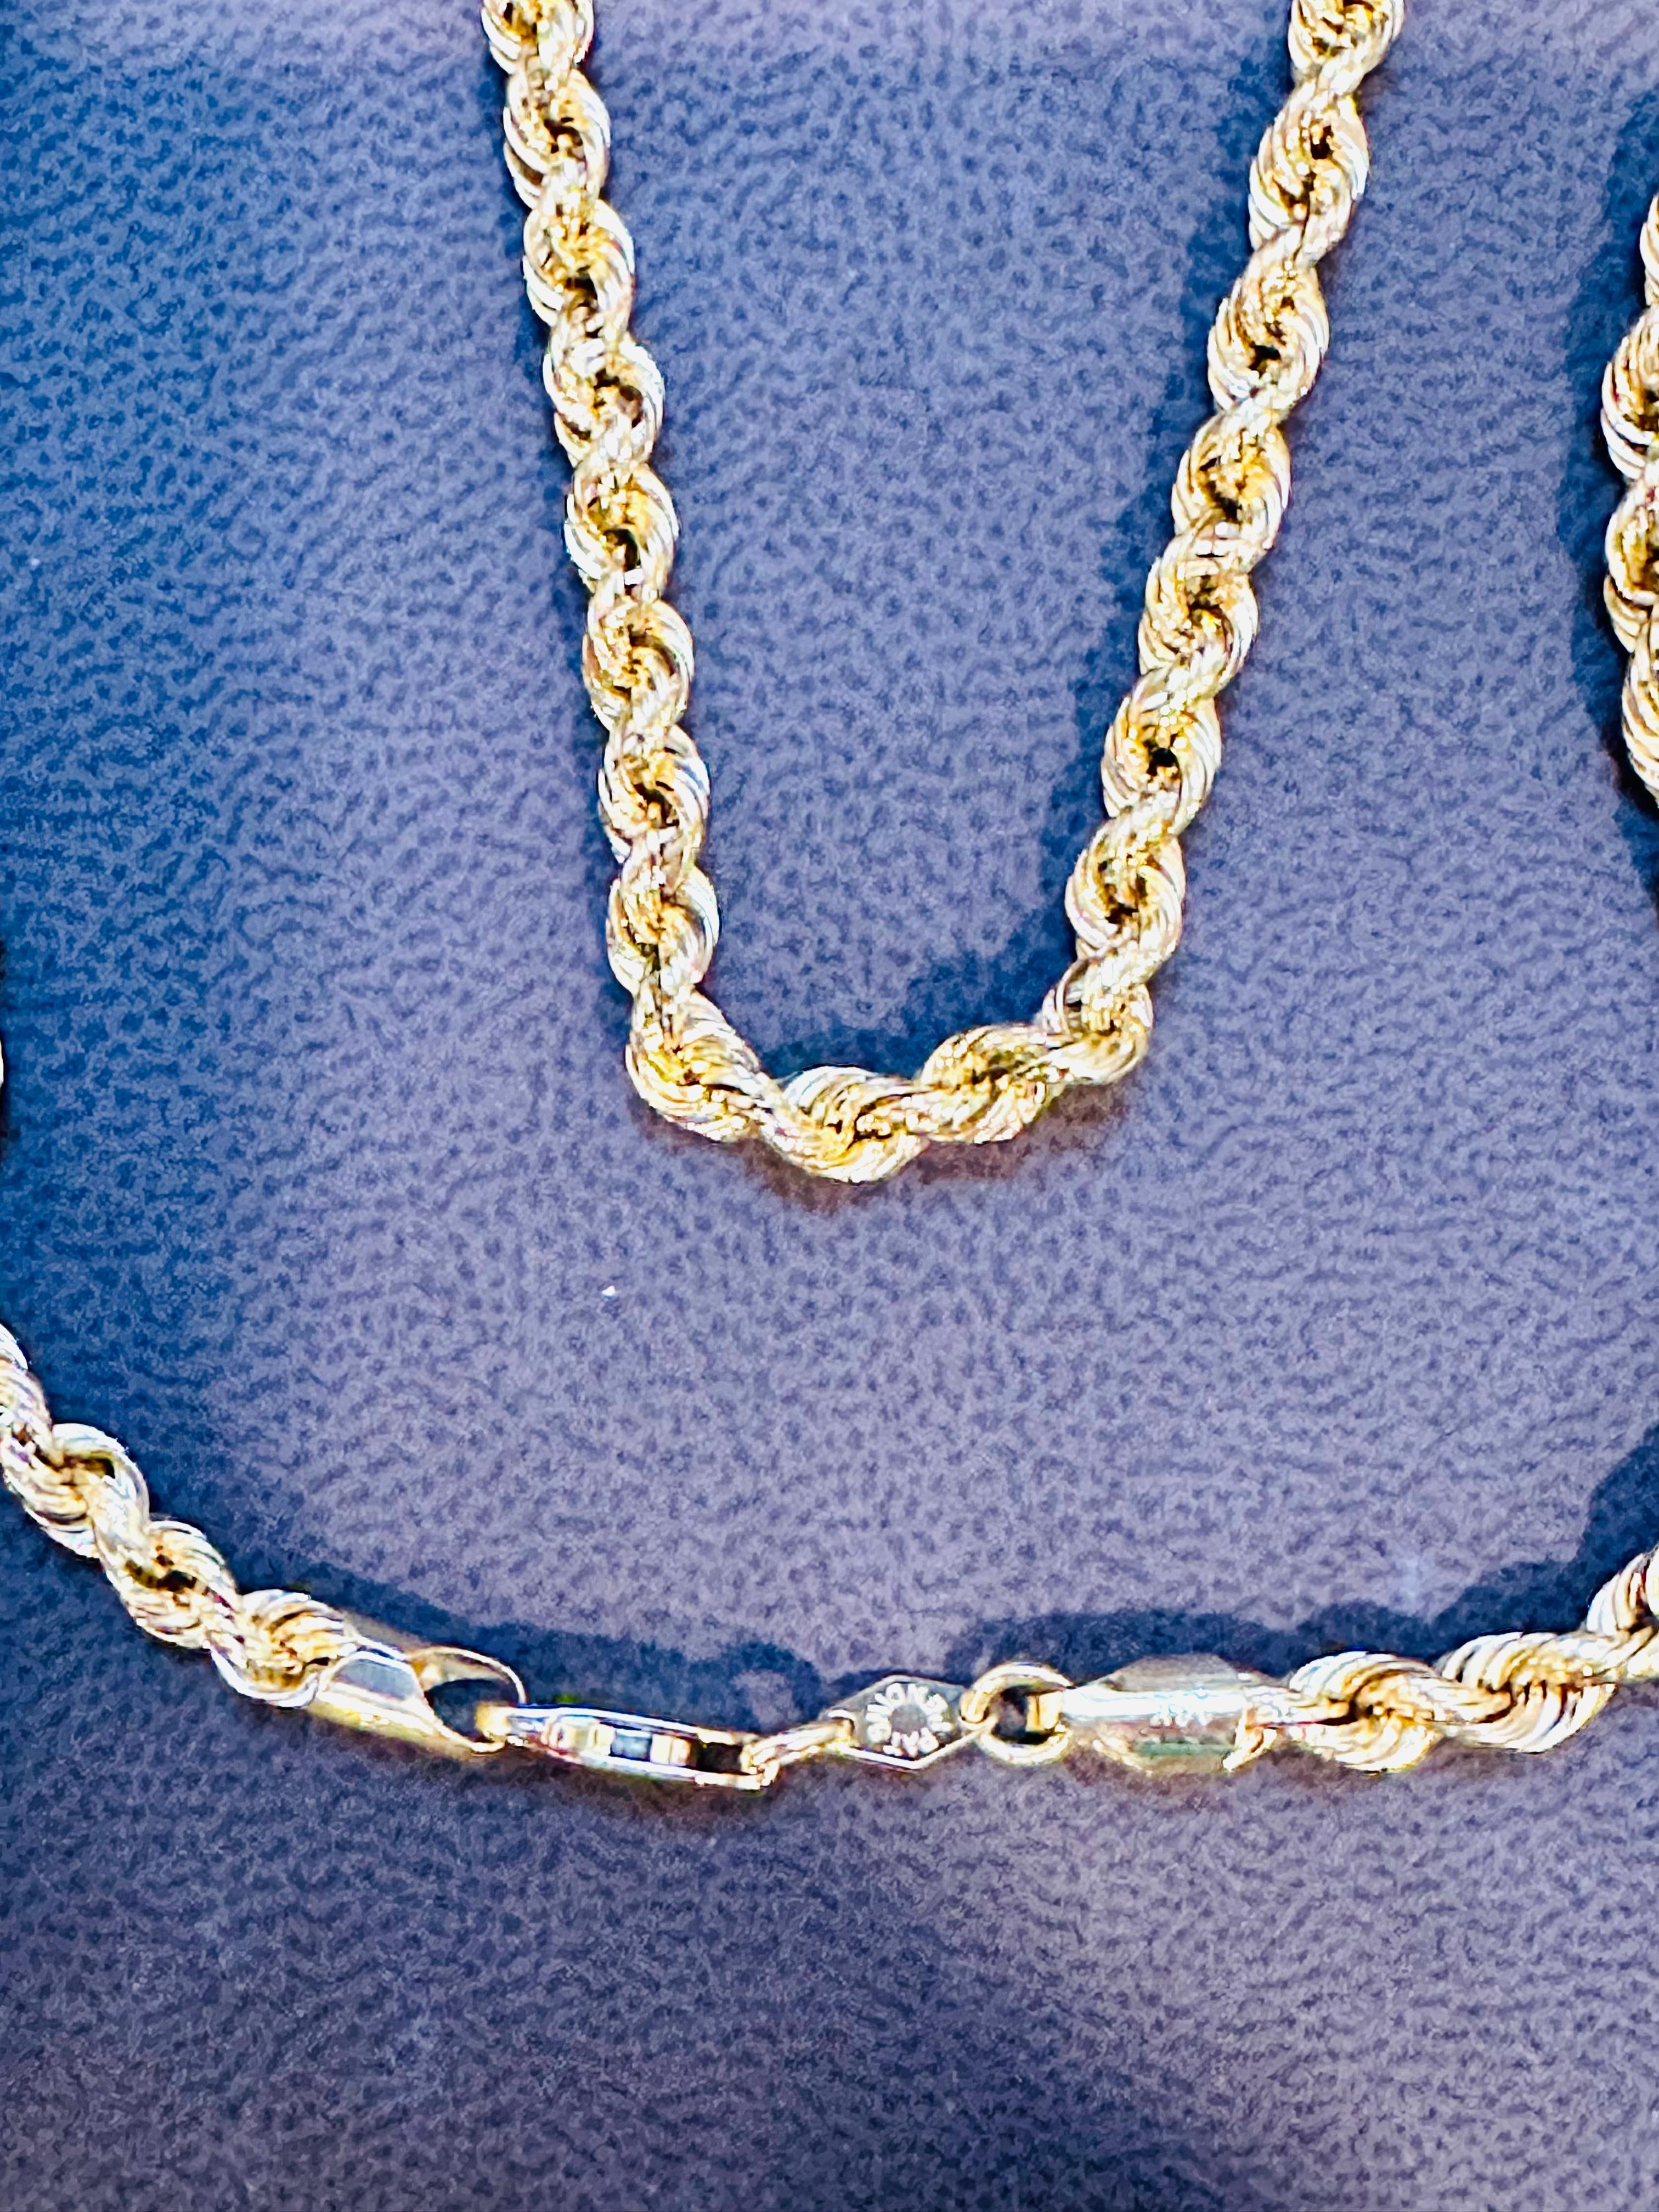 Vintage 14 Karat Yellow Gold 8.3 Gm, Rope Chain Necklace For Sale 4